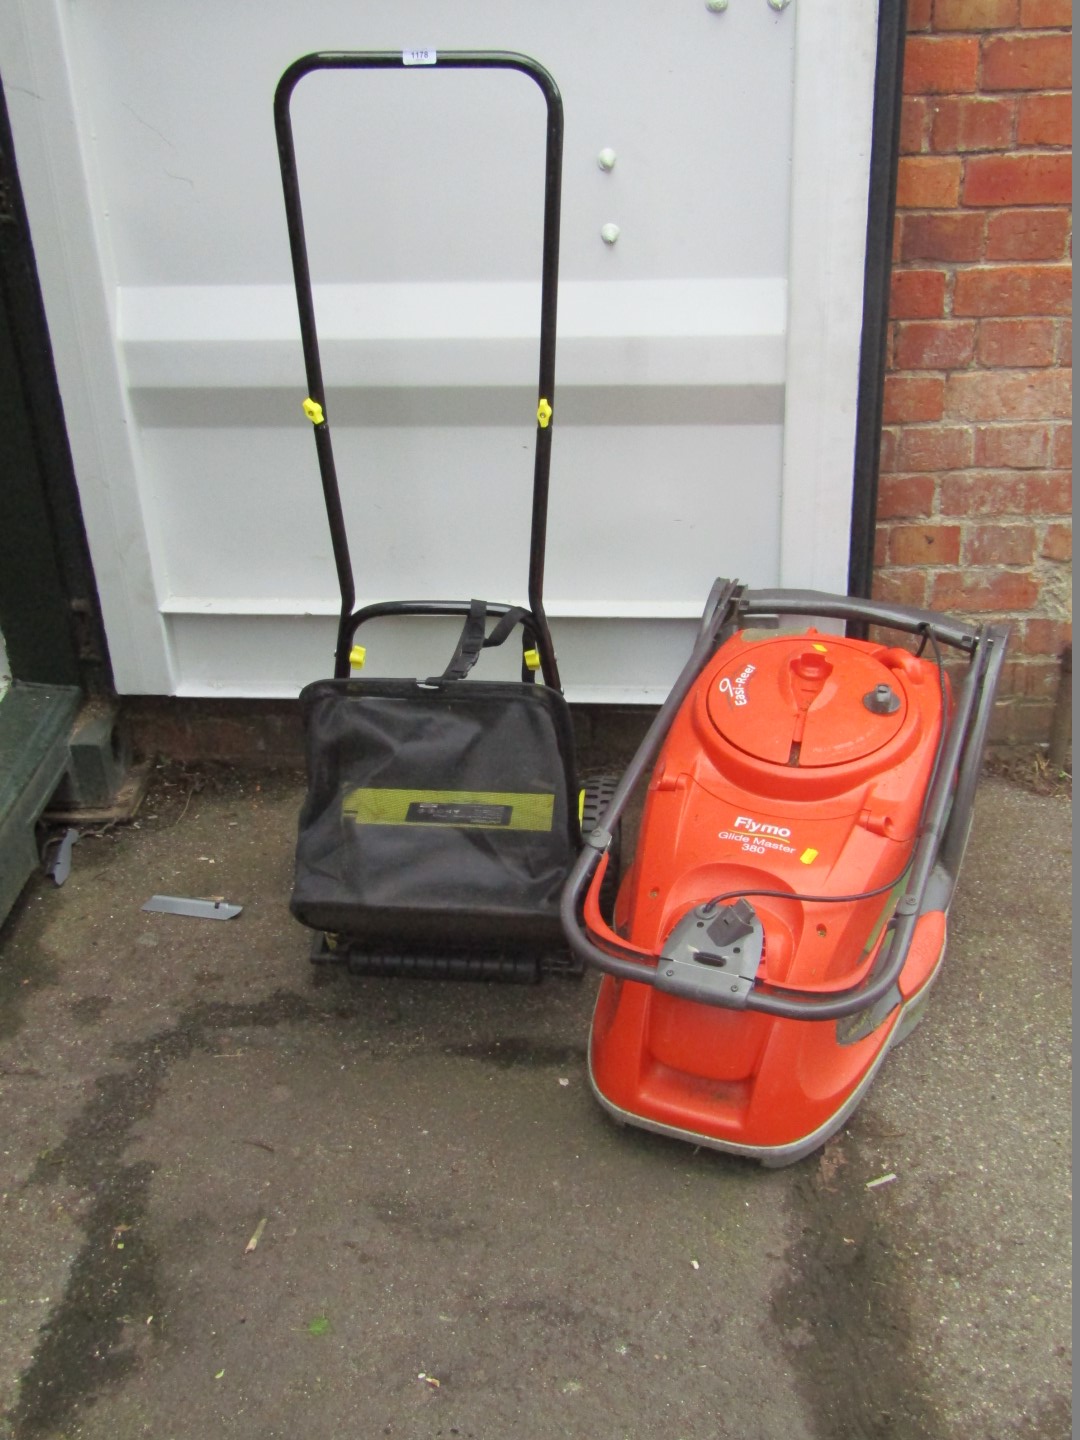 A Flymo 380 electric mower and a Challenge hand push cylinder mower, model GT5614. (2)